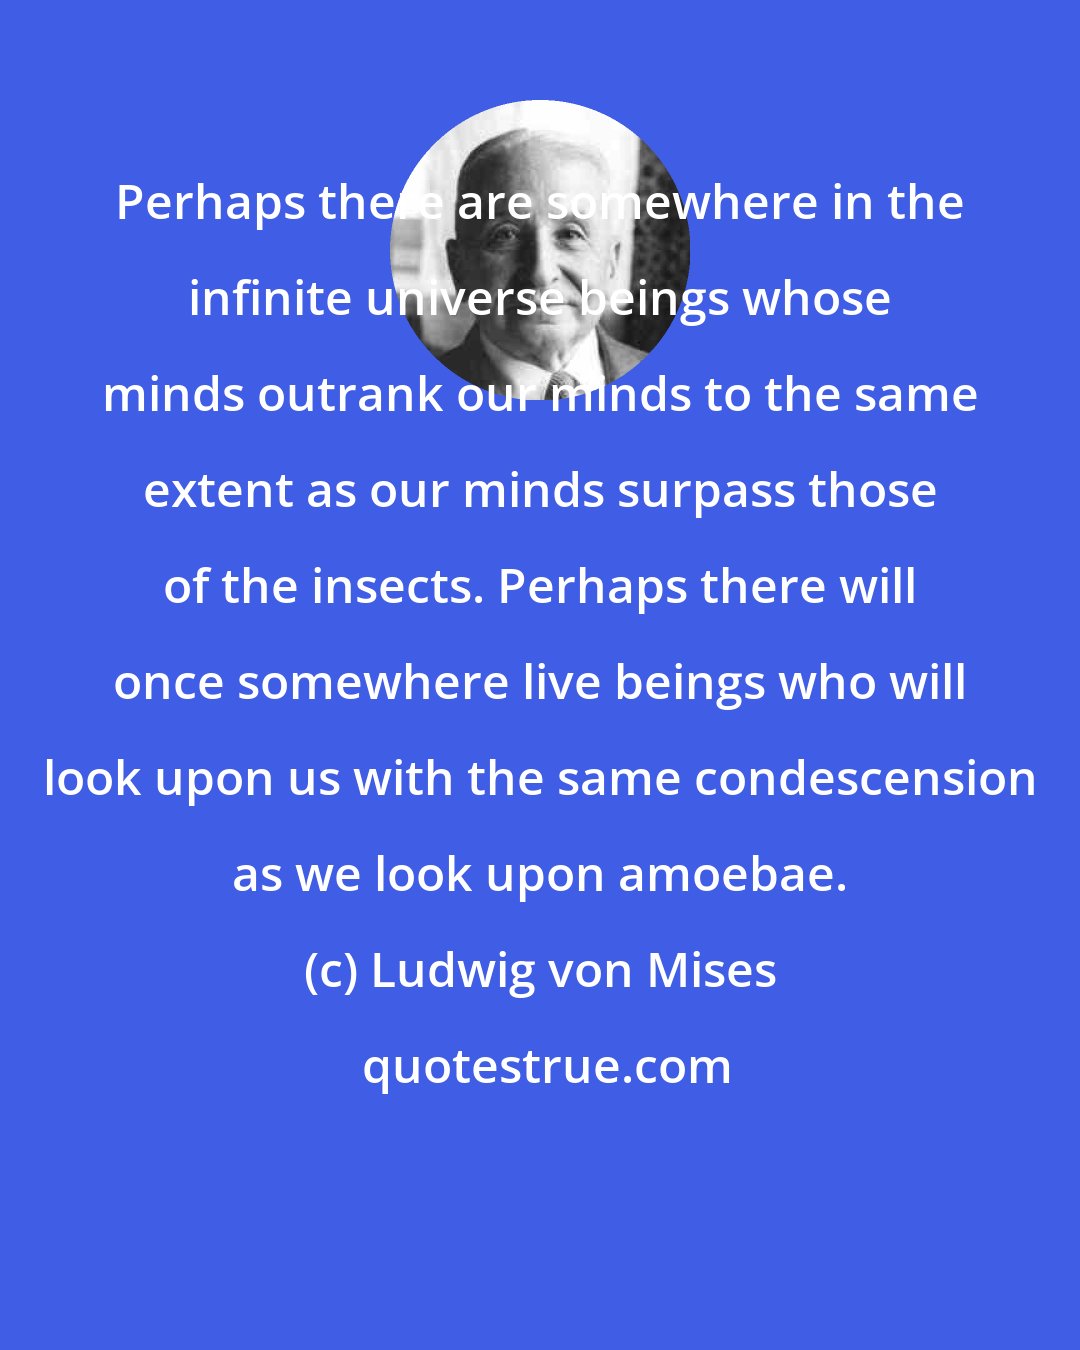 Ludwig von Mises: Perhaps there are somewhere in the infinite universe beings whose minds outrank our minds to the same extent as our minds surpass those of the insects. Perhaps there will once somewhere live beings who will look upon us with the same condescension as we look upon amoebae.